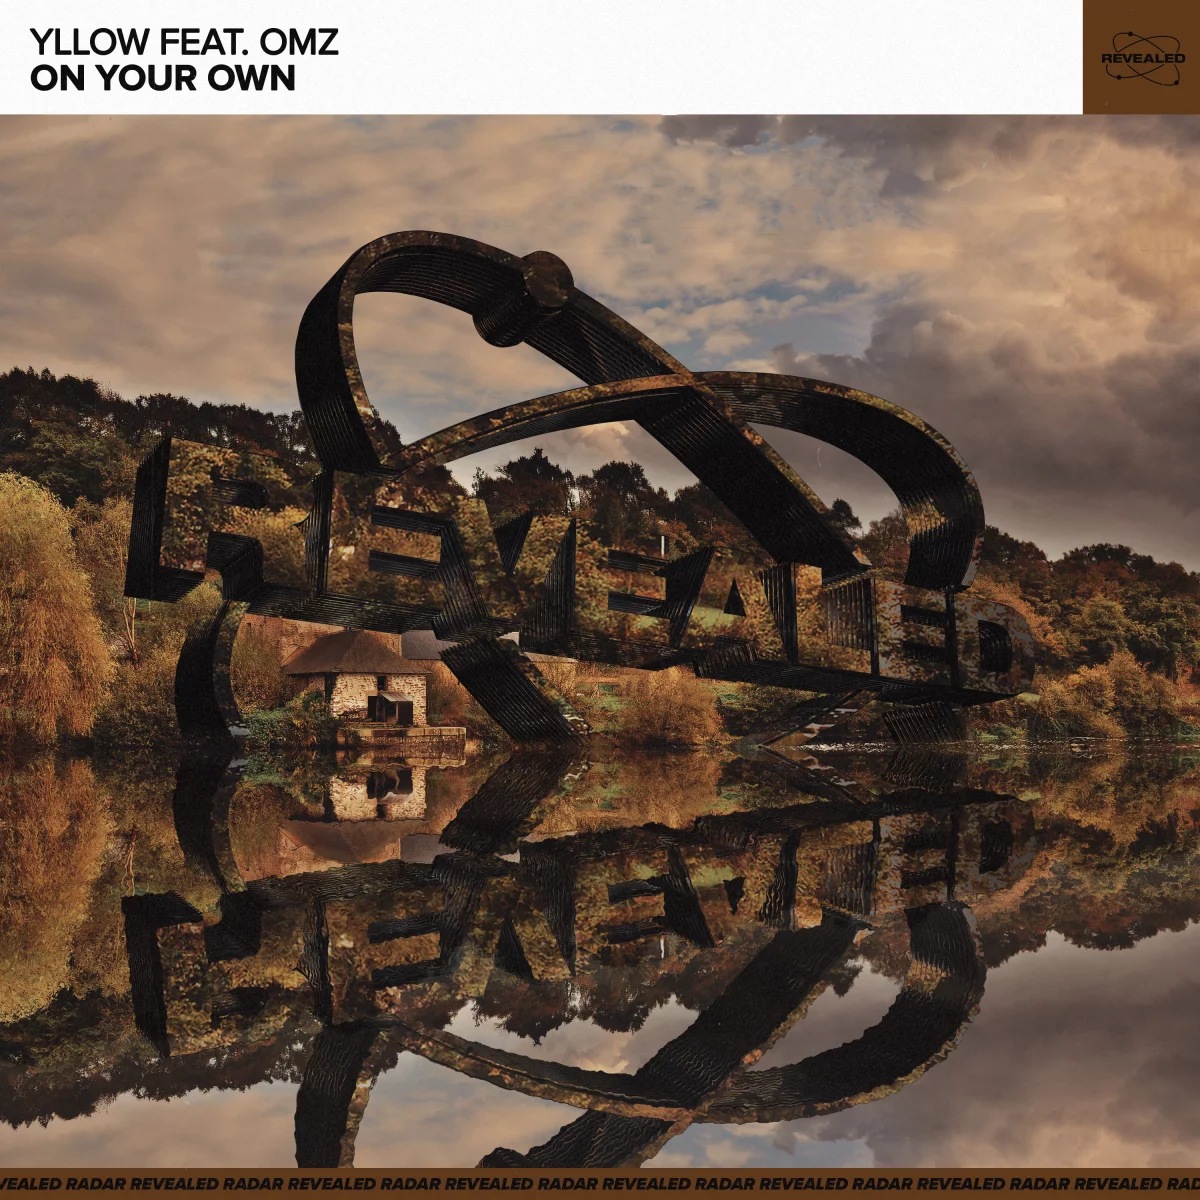 On Your Own - YLLOW⁠ feat. OMZ⁠